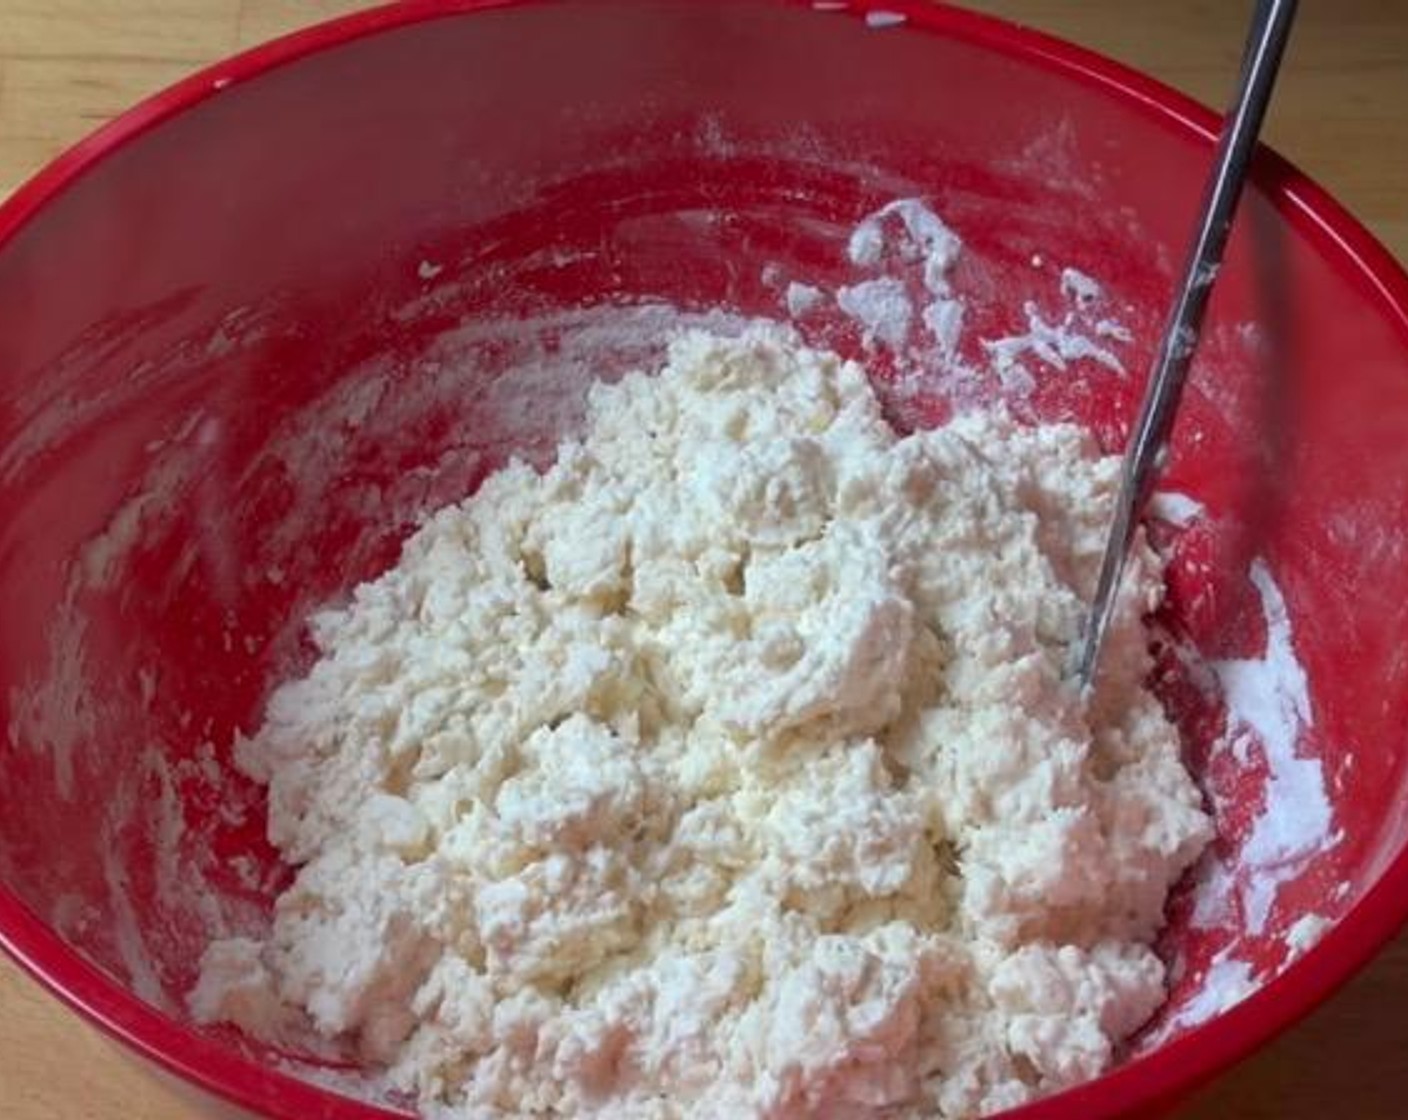 step 1 In a large mixing bowl, add Self-Rising Flour (2 cups), Salt (to taste) and Natural Unflavored Yogurt (2 cups). Using a round-bladed knife, make cutting motions through the mixture until it comes together as dough.